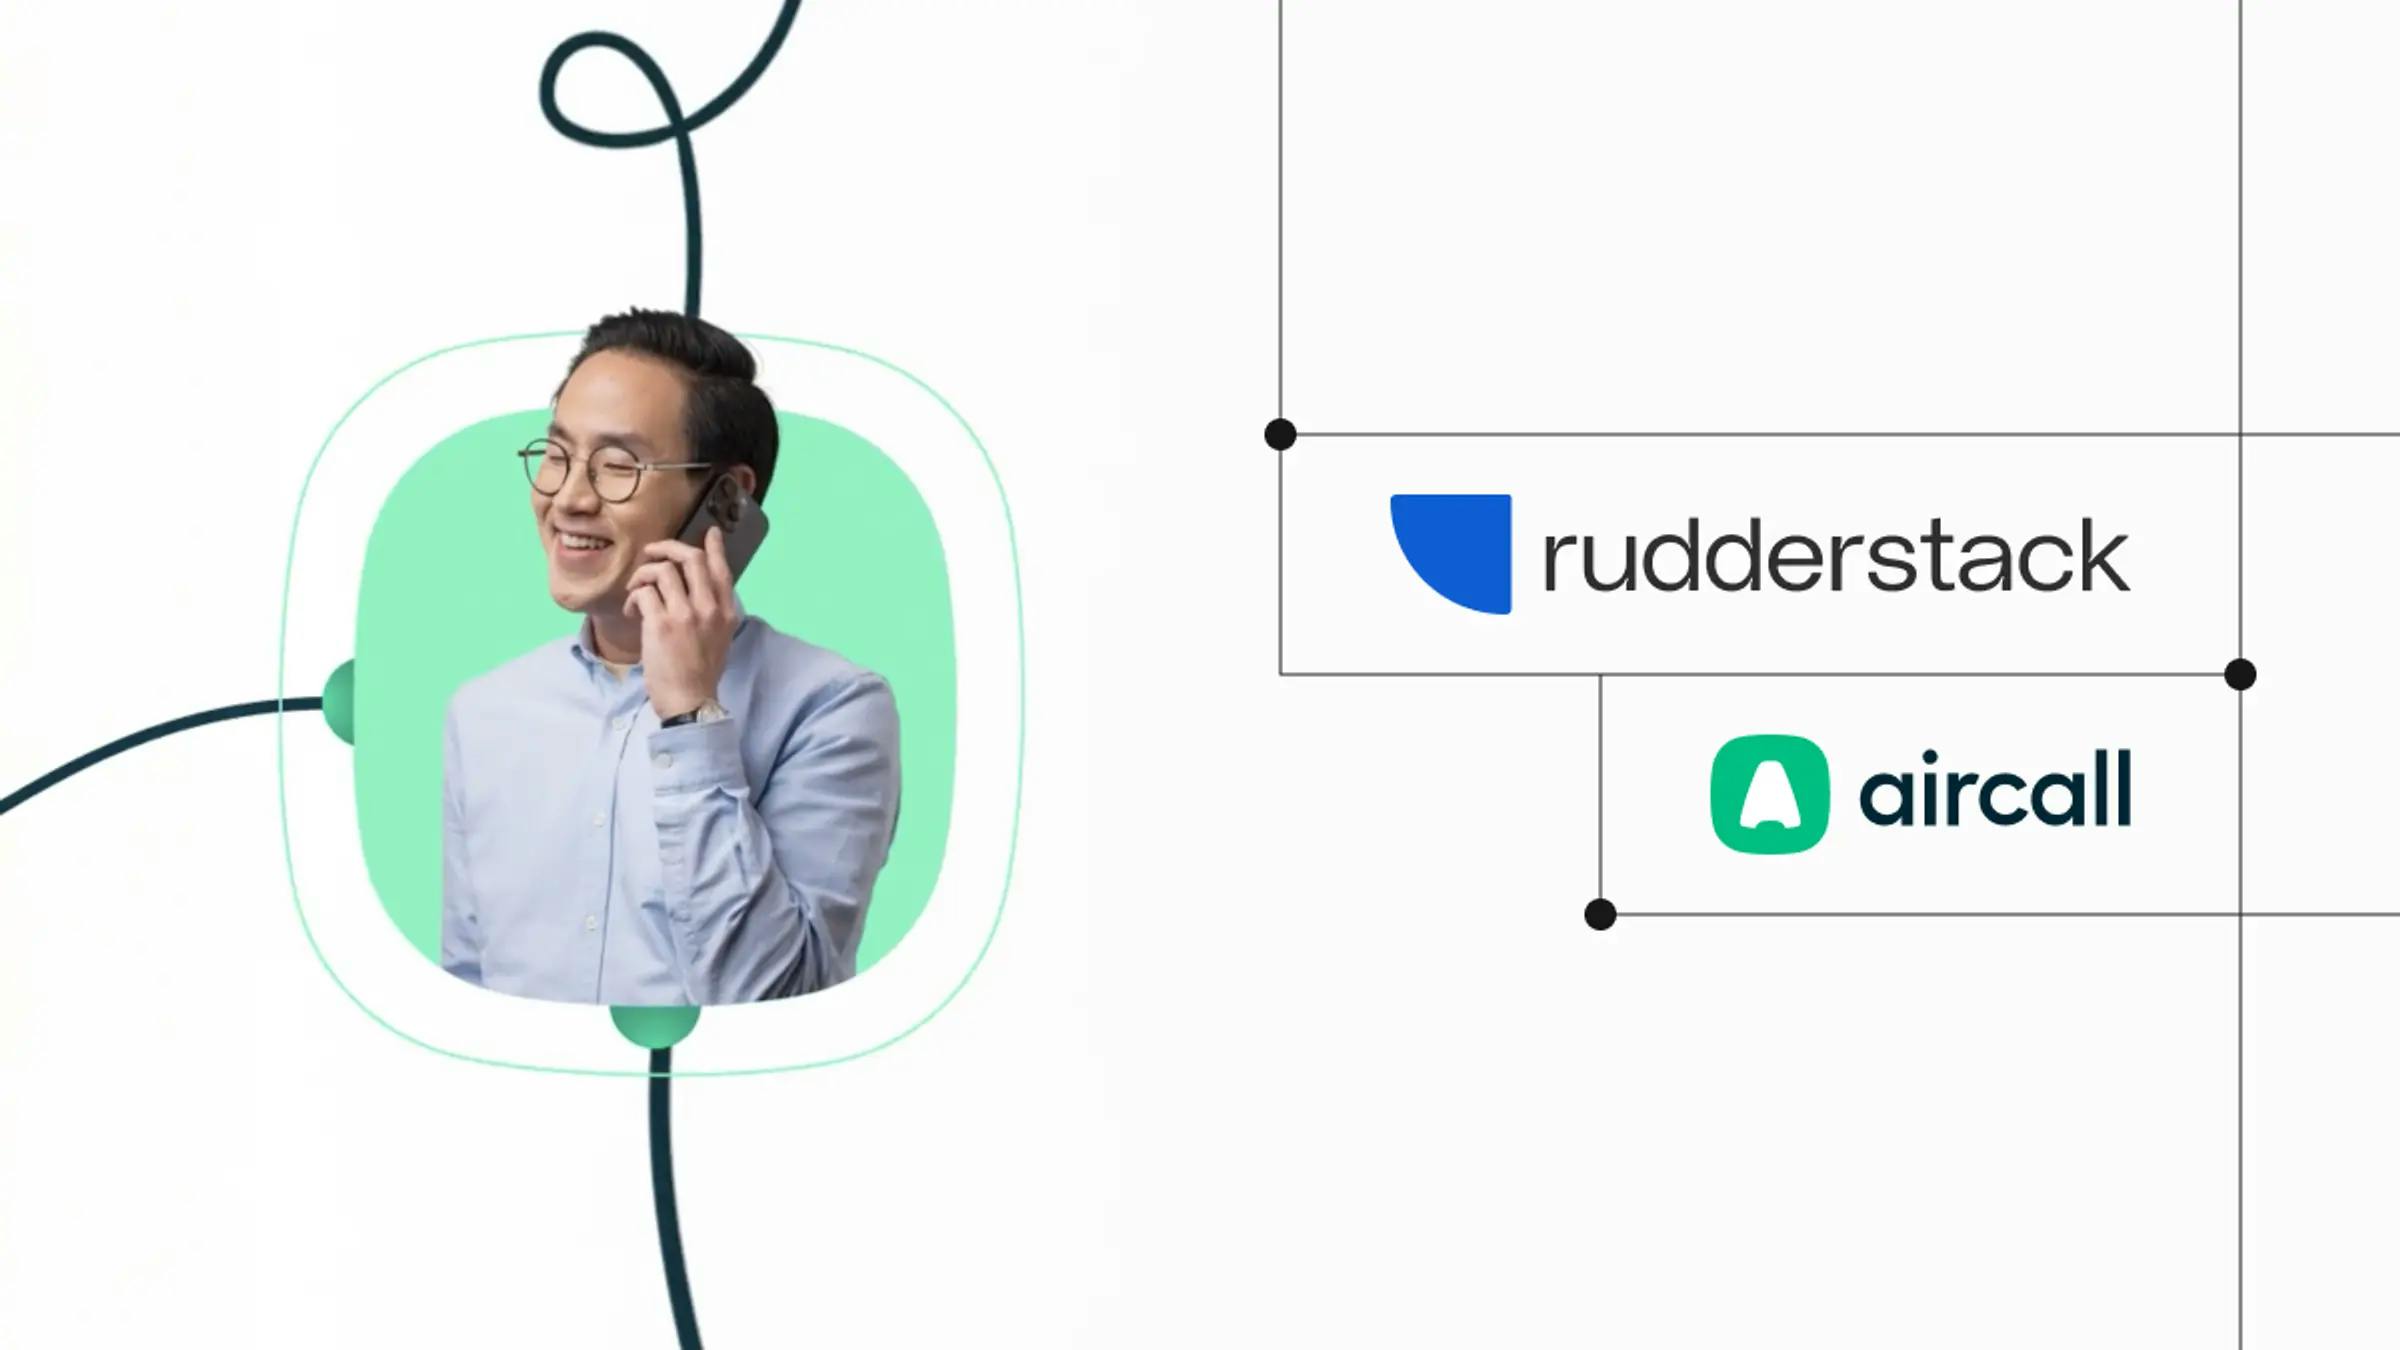 Aircall streamlines data integration and reduces costs by switching to RudderStack